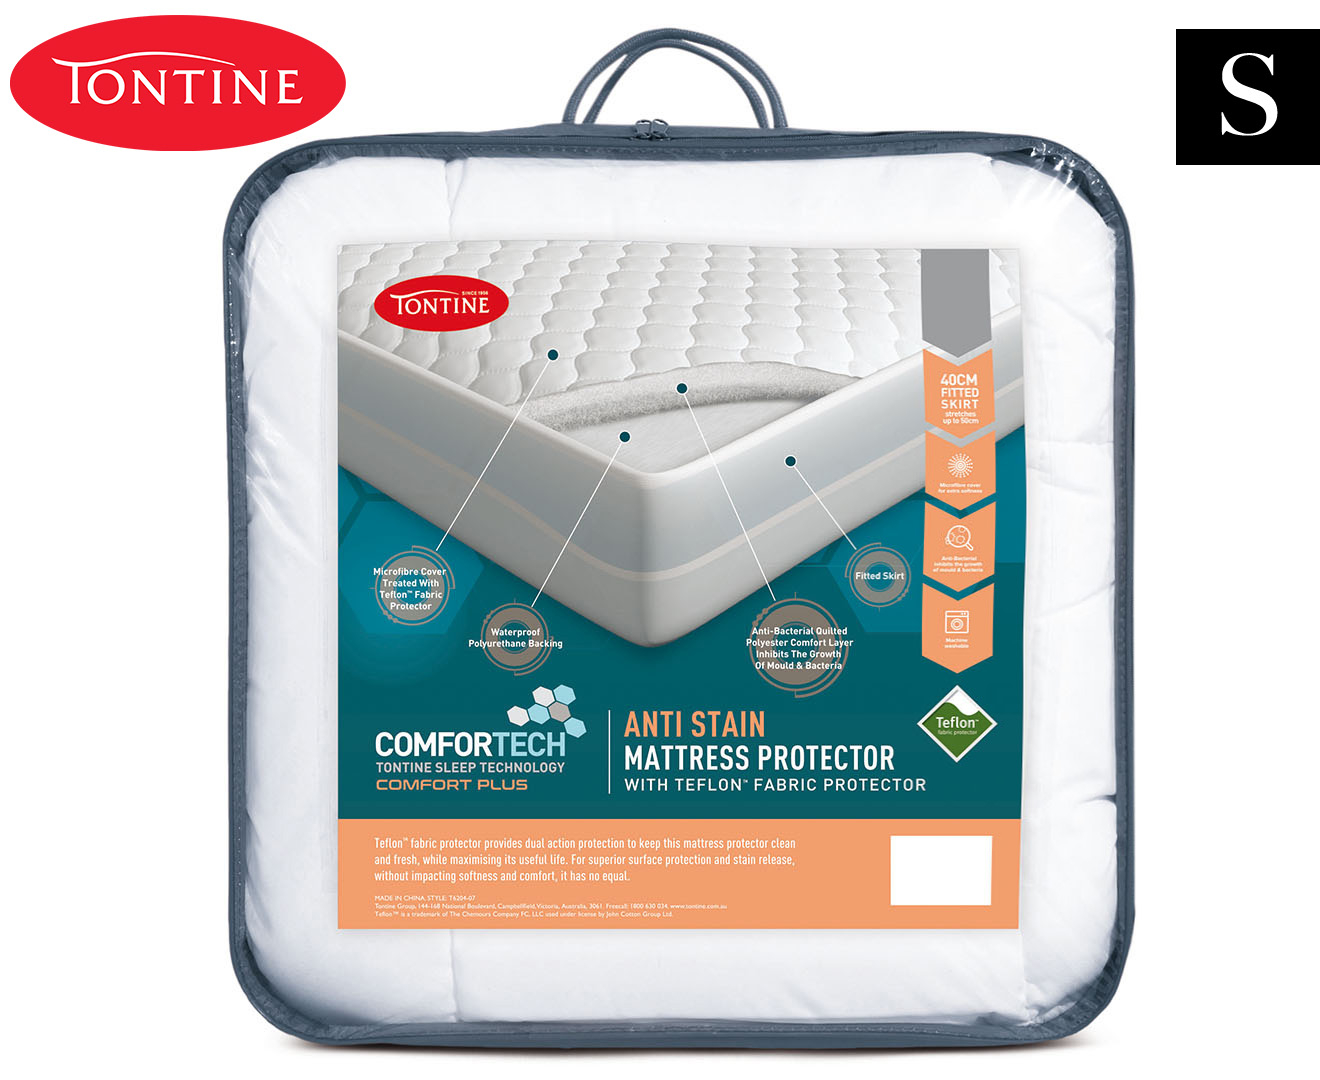 tontine comfortech anti allergy mattress protector review